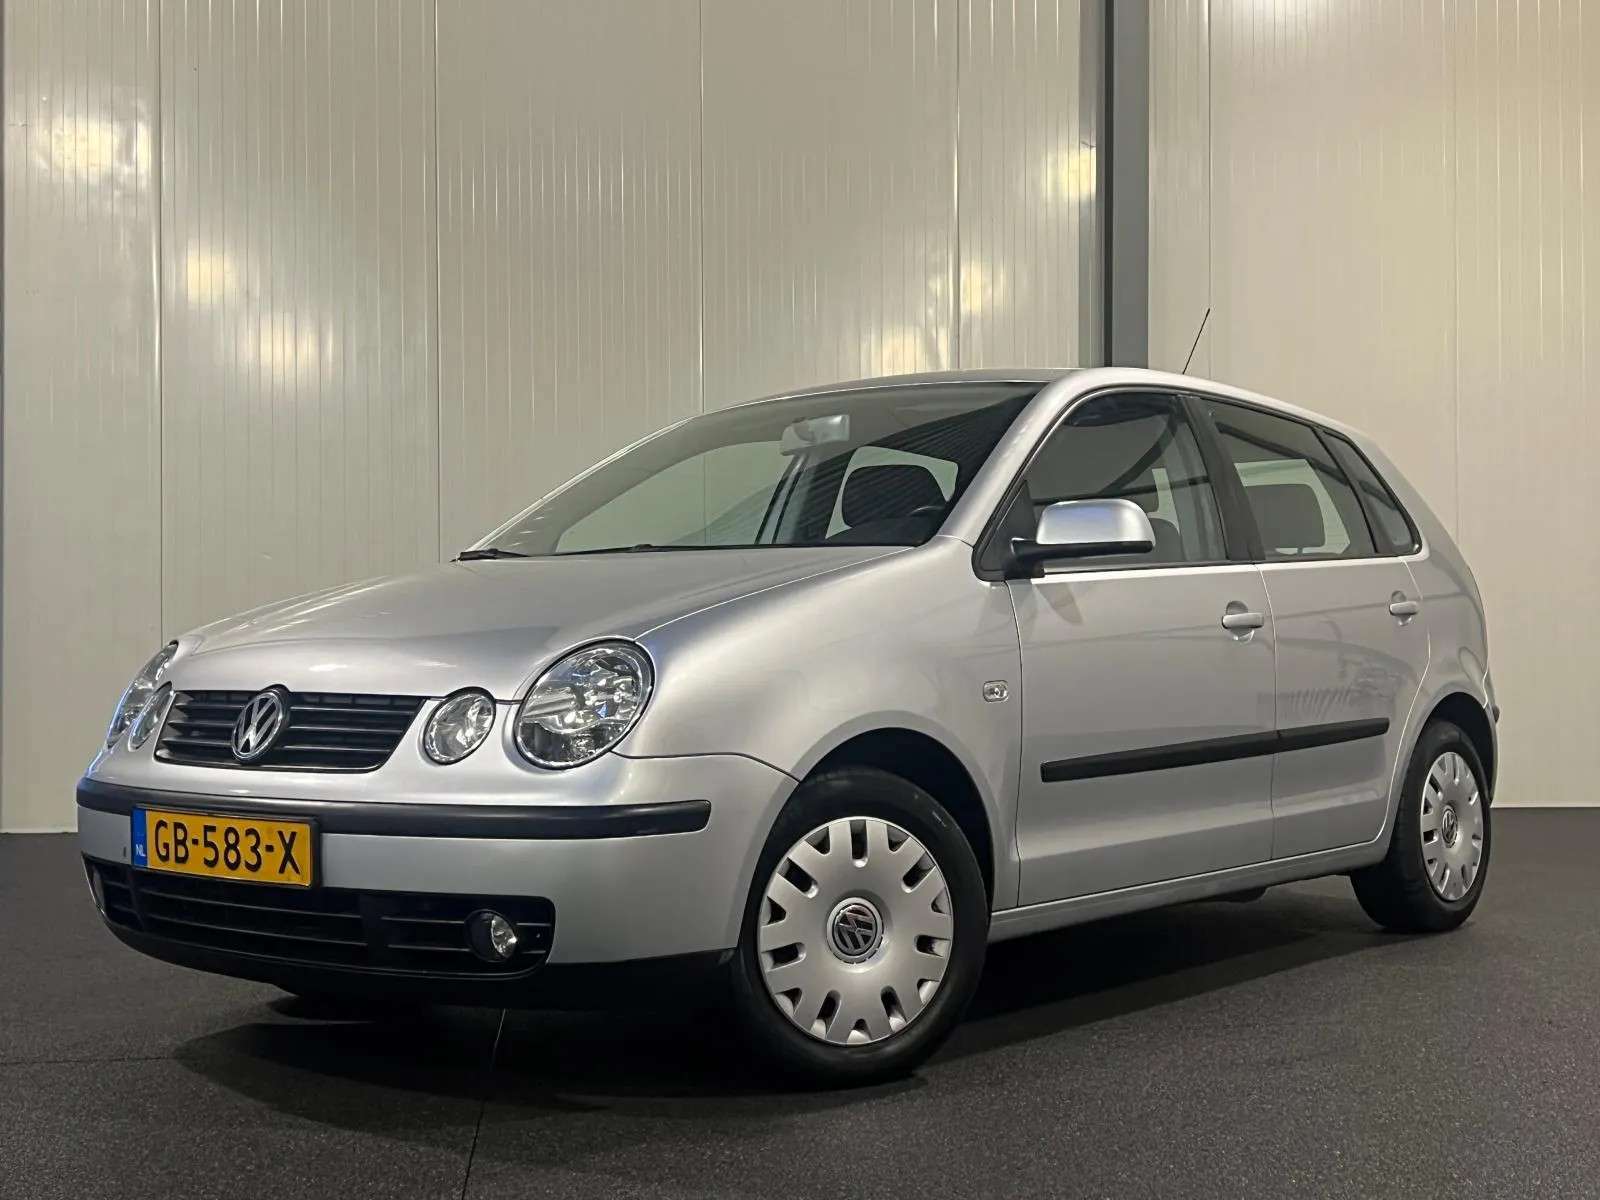 Volkswagen Polo Compact in Grey used in WOLVEGA for € 2,445.-